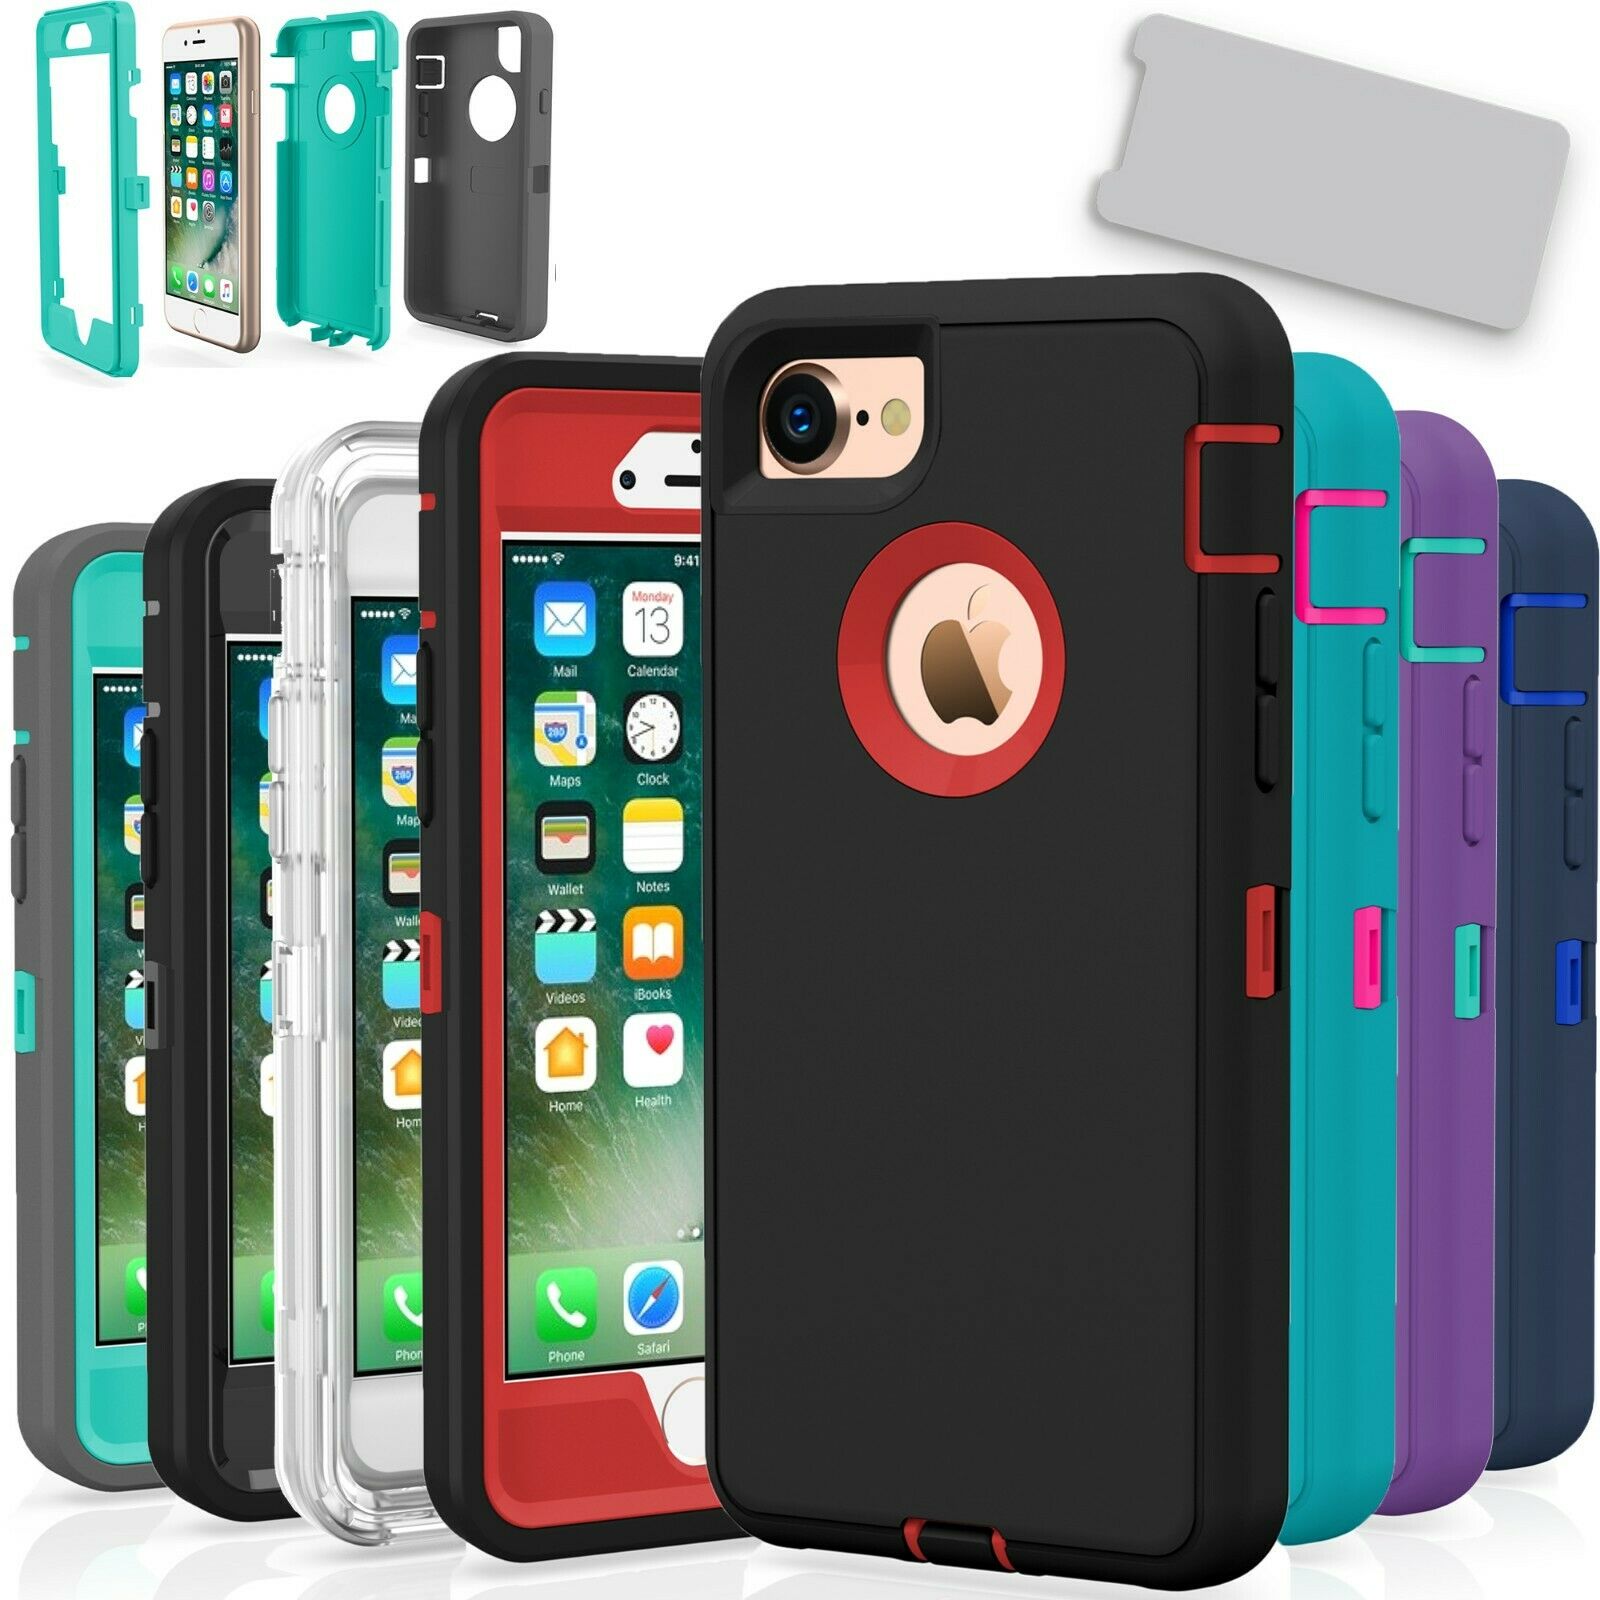 For iPhone 7 / 7 Plus 8 / 8 Plus Case Cover Protective Hybrid Rugged Shockproof alphaaccessmobile 